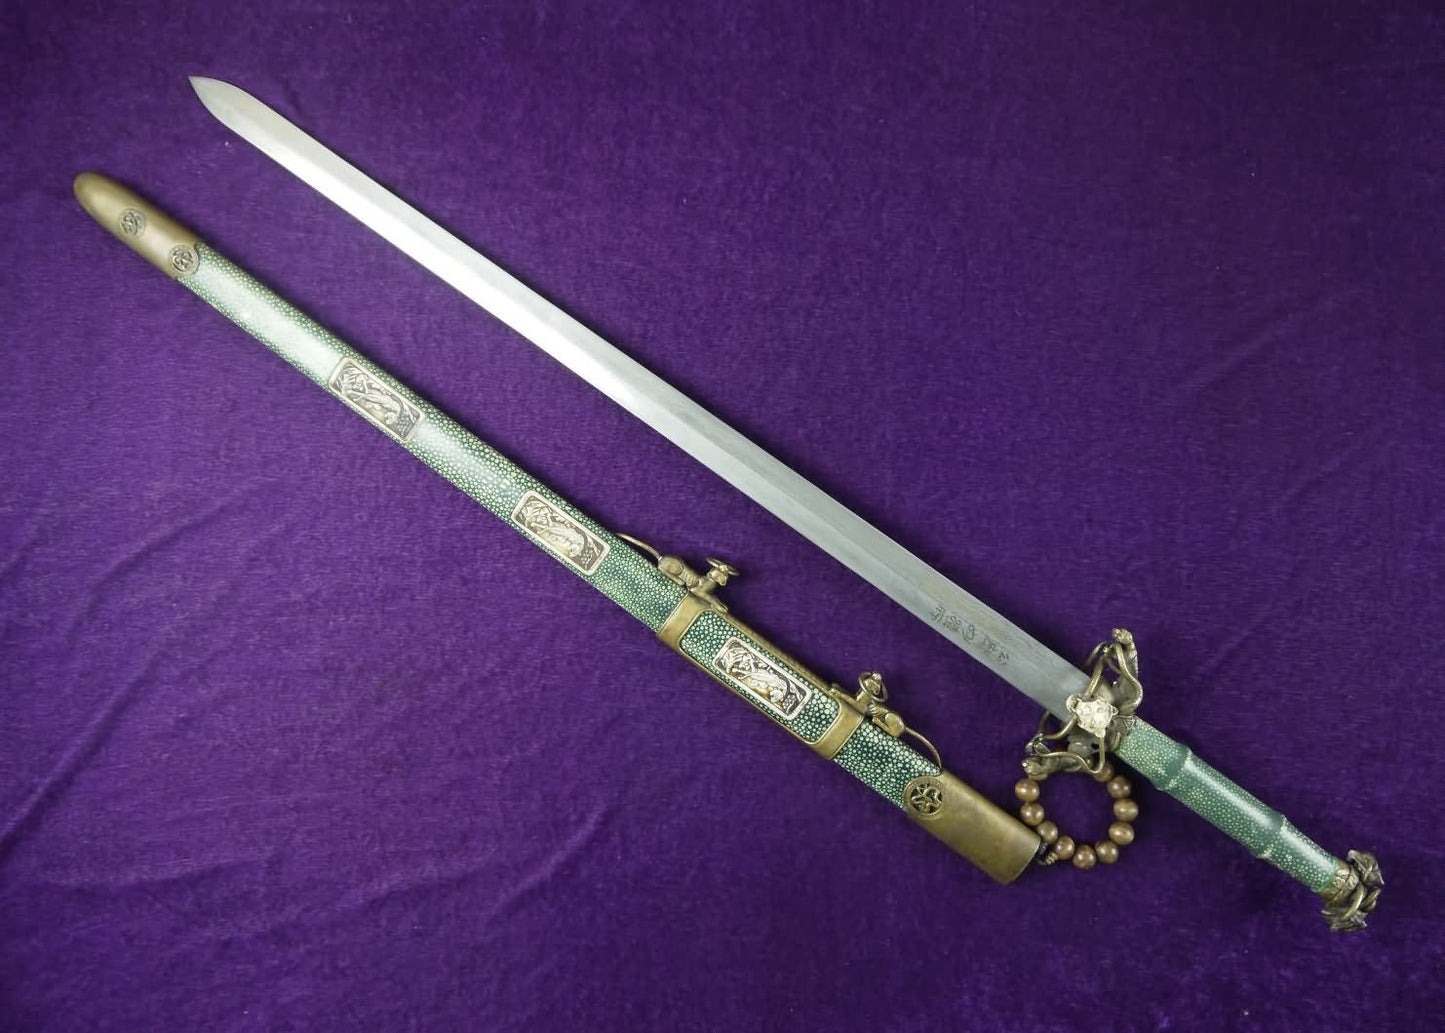 Snake-like sword/Damascus steel blade/Pearl skin wrapped scabbard/Brass fitted/Length 39" - Chinese sword shop